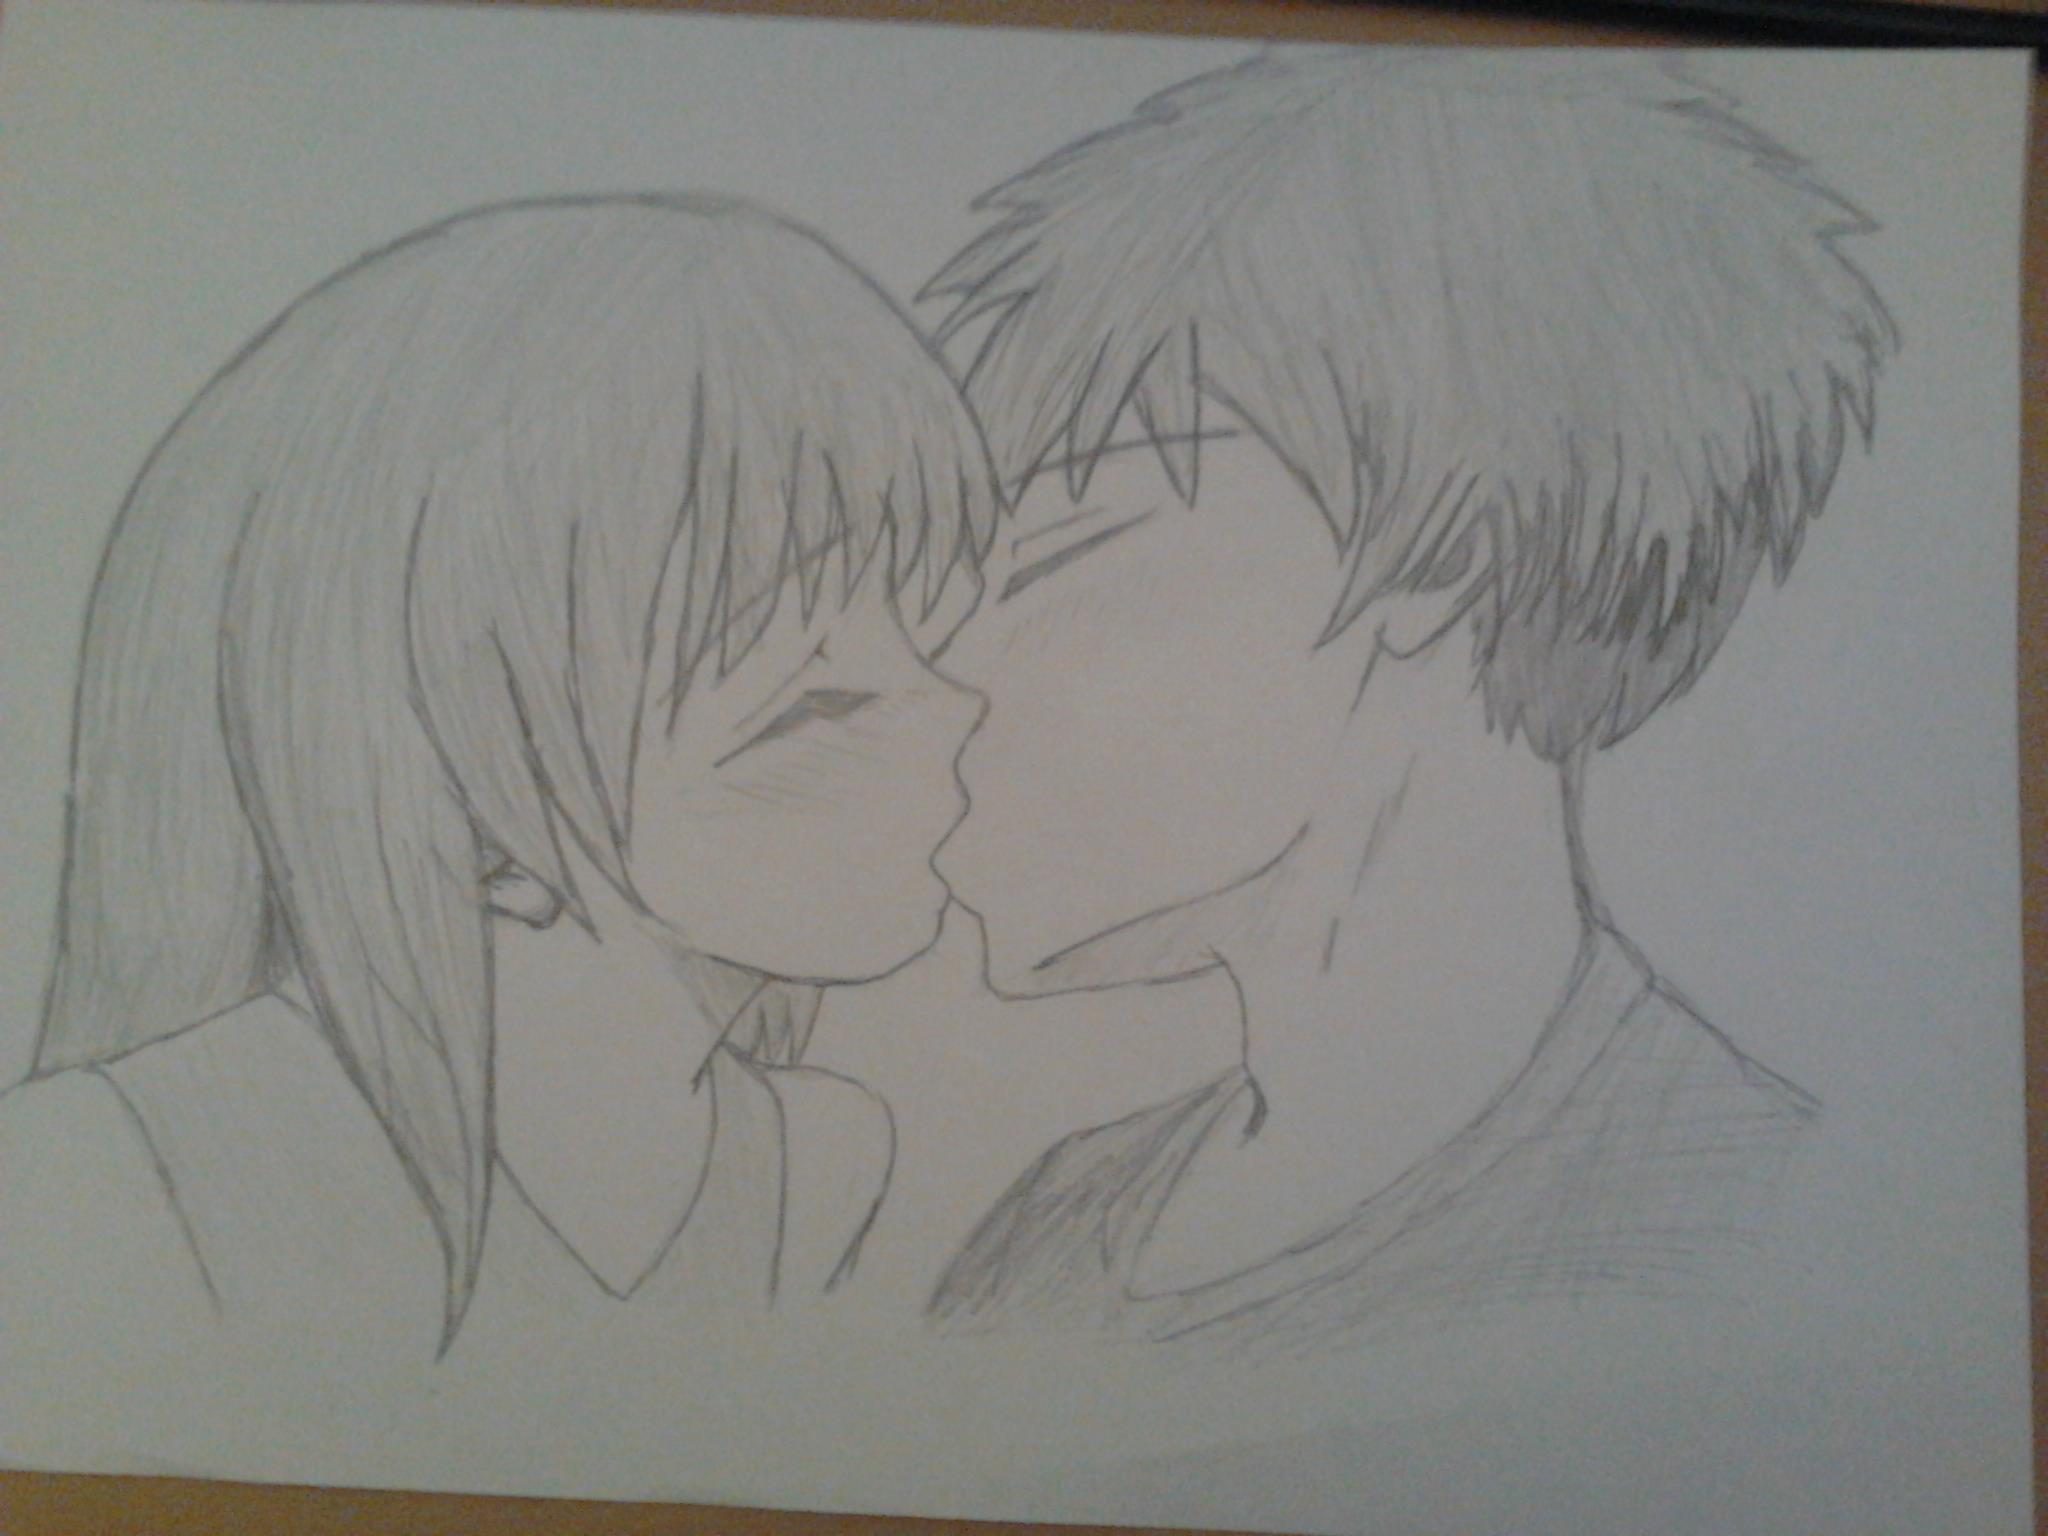 ANIME CHARACTERS KISSING. DREW 6 YEARS AGO — Steemit